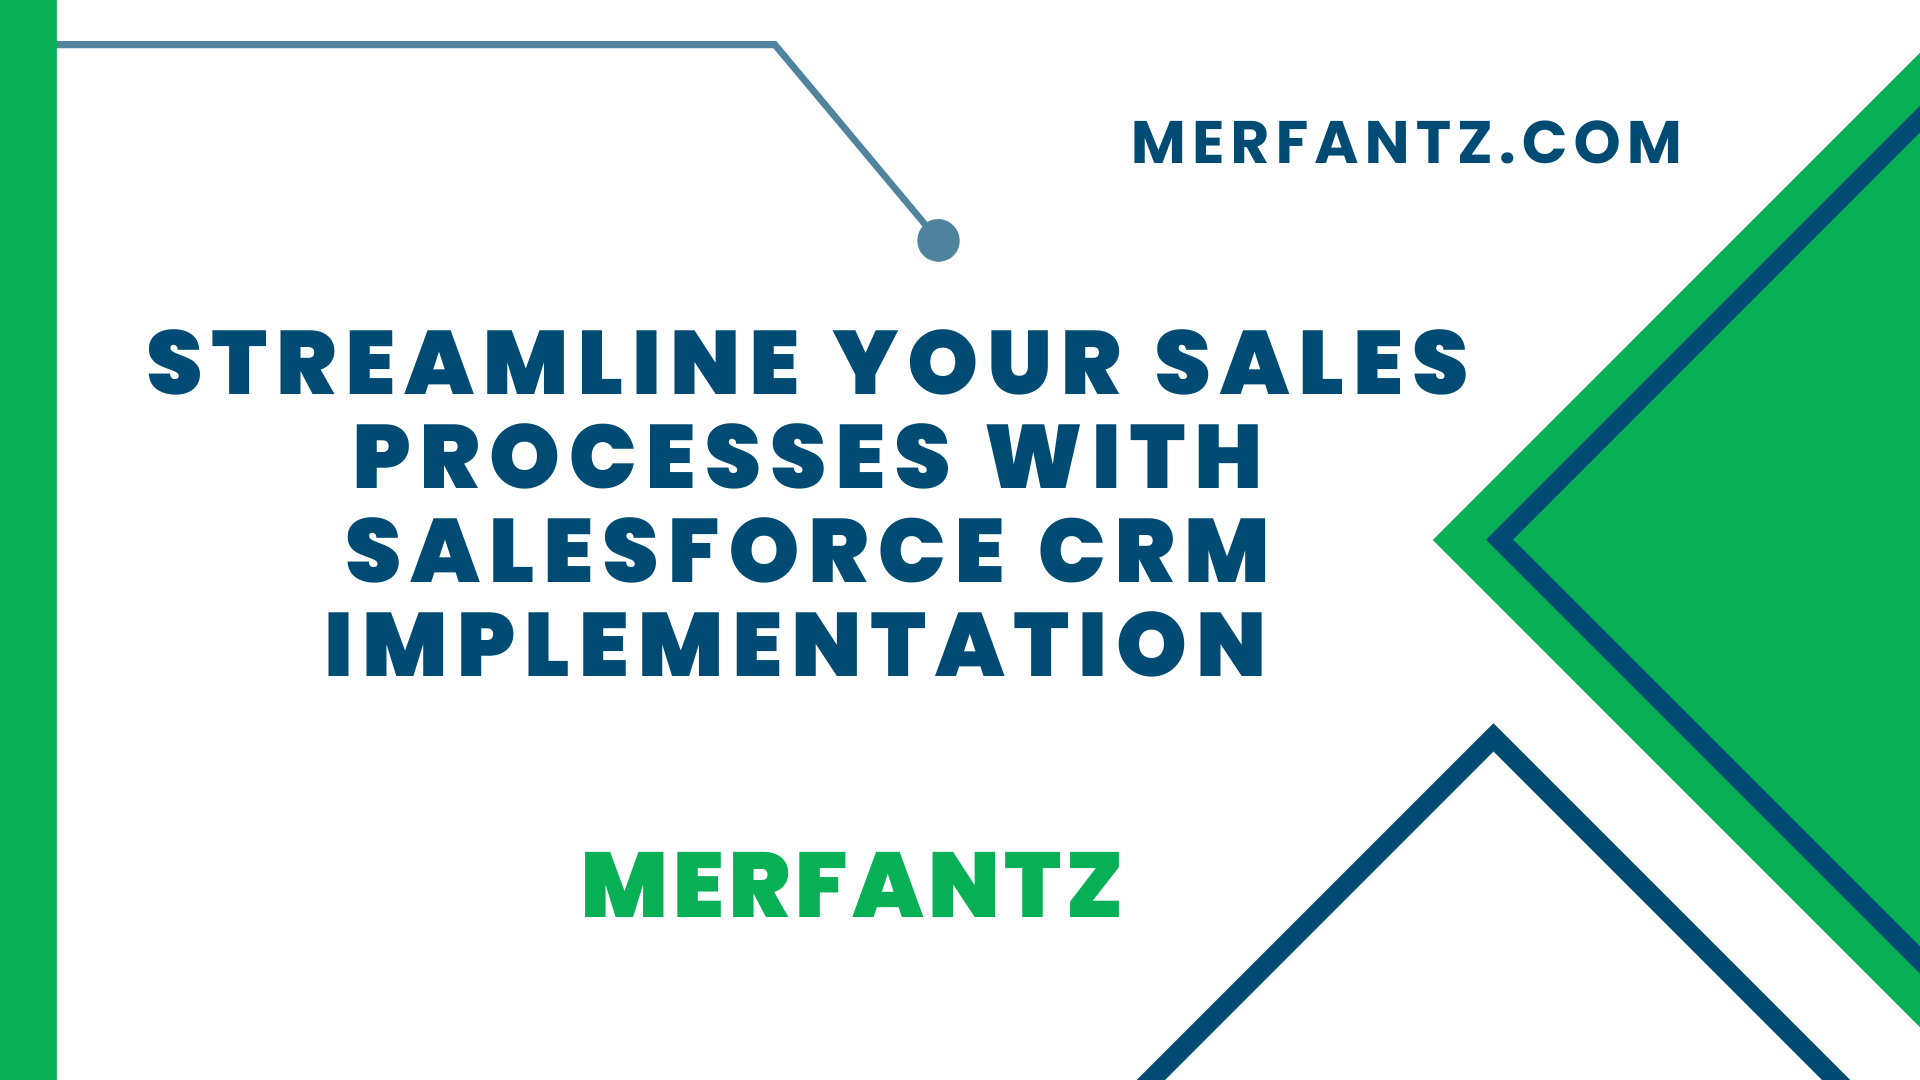 Streamline Your Sales Processes with Salesforce CRM Implementation